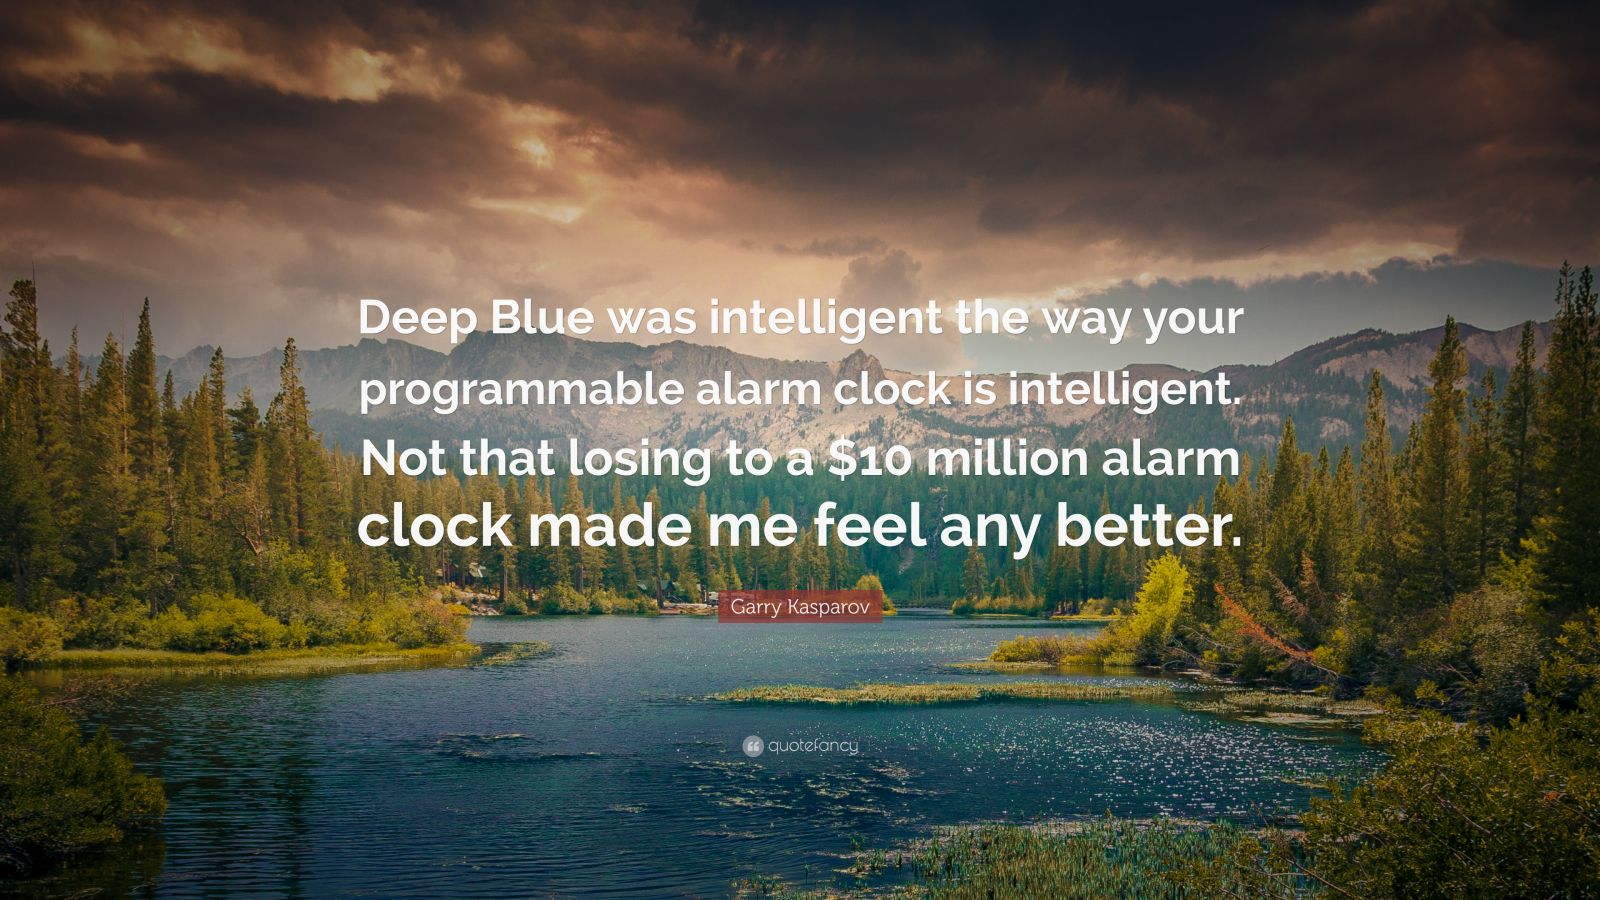 Garry Kasparov Quote: “Deep Blue was intelligent the way your programmable  alarm clock is intelligent. Not that losing to a $10 million alarm c”